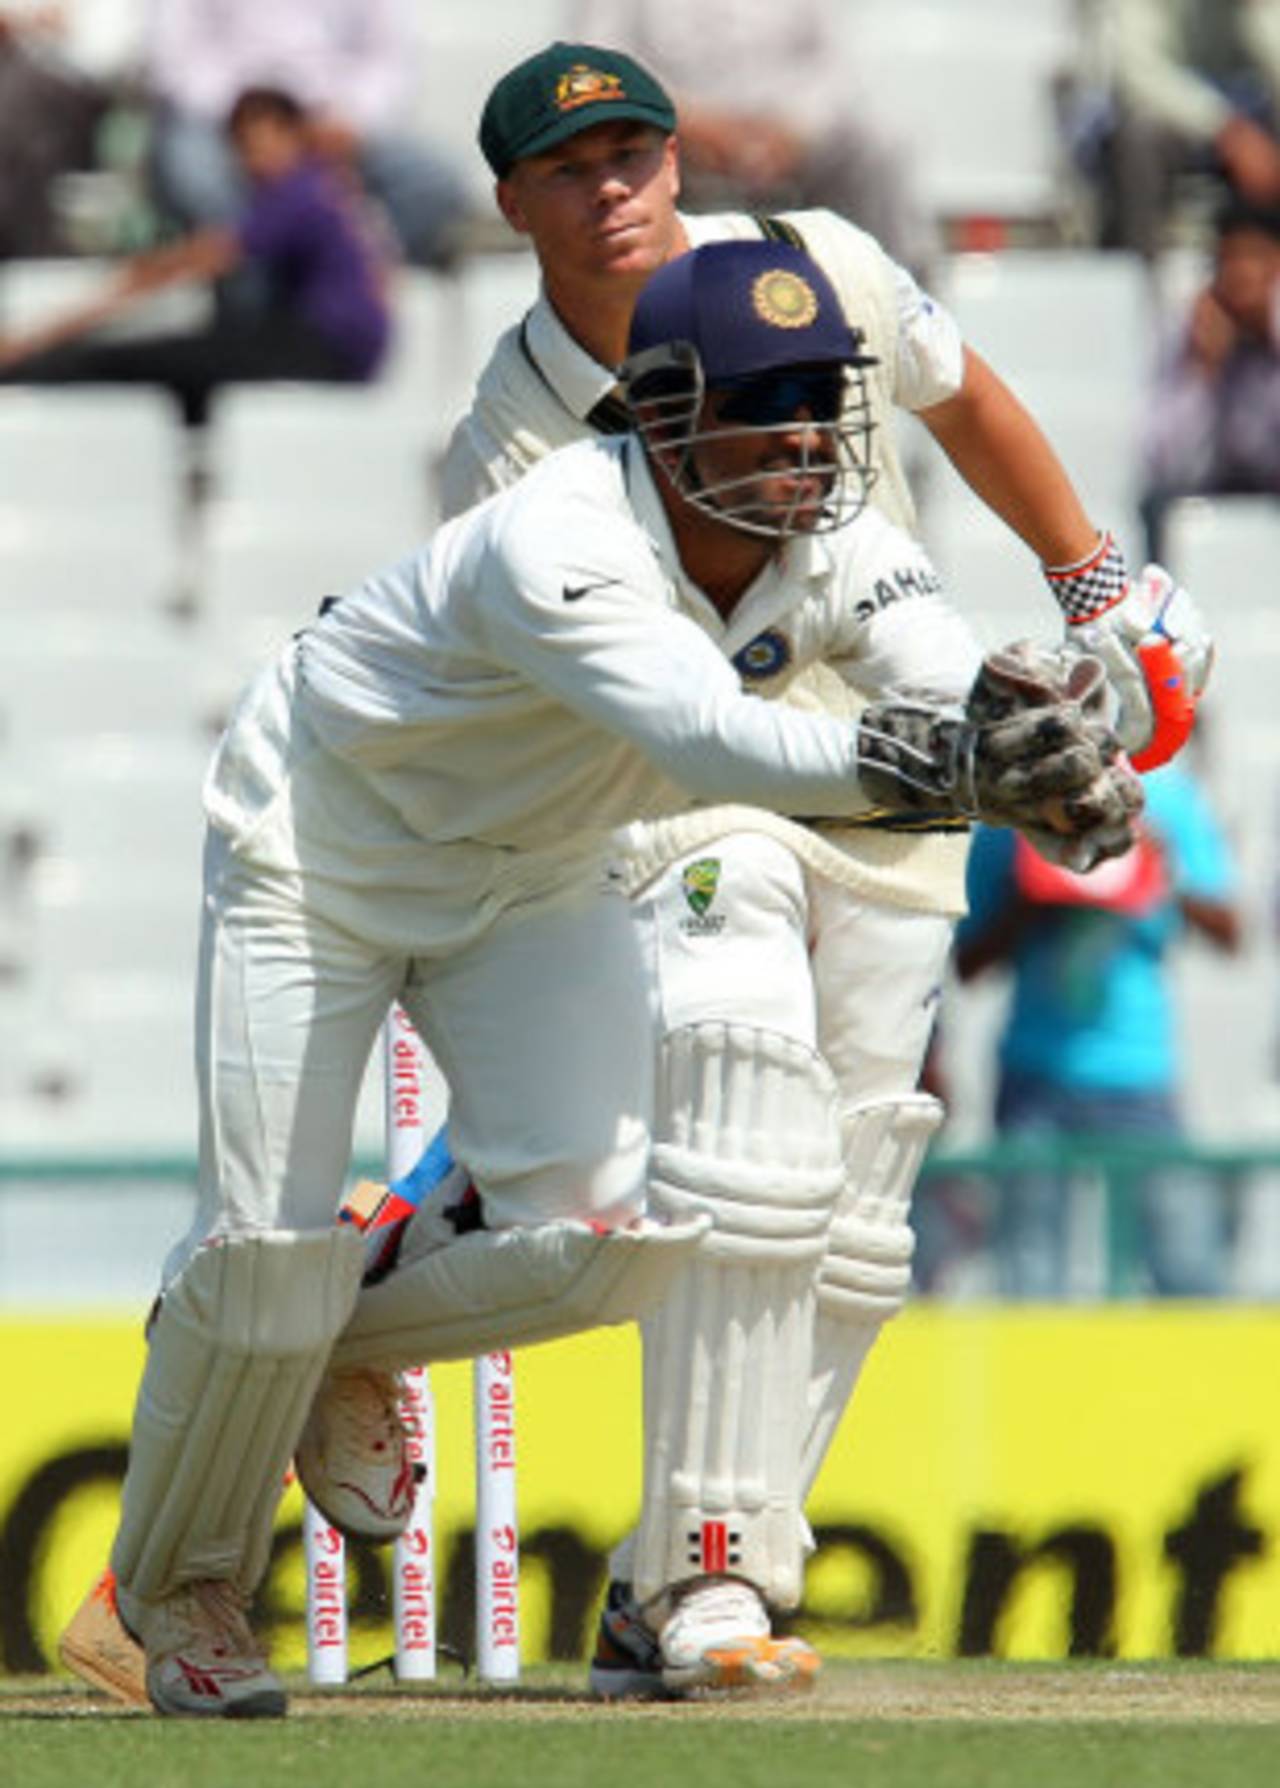 MS Dhoni completes a bat-pad catch off David Warner, India v Australia, 3rd Test, Mohali, 2nd day, March 15, 2013